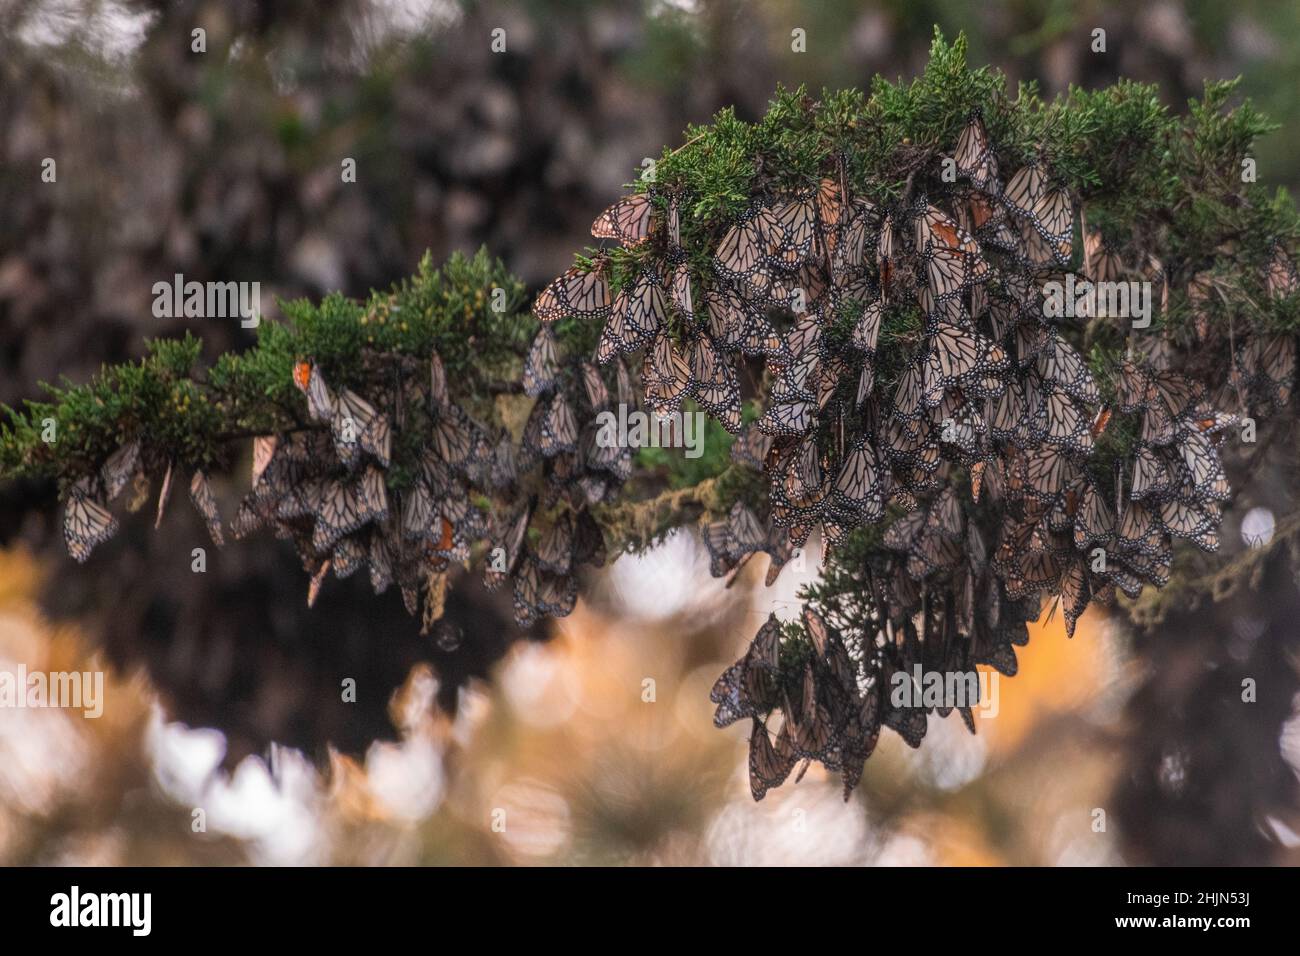 An aggregation of overwintering monarch butterflies (Danaus plexippus) in the Butterfly Sanctuary in Pacific Grove, Monterey county, California. Stock Photo